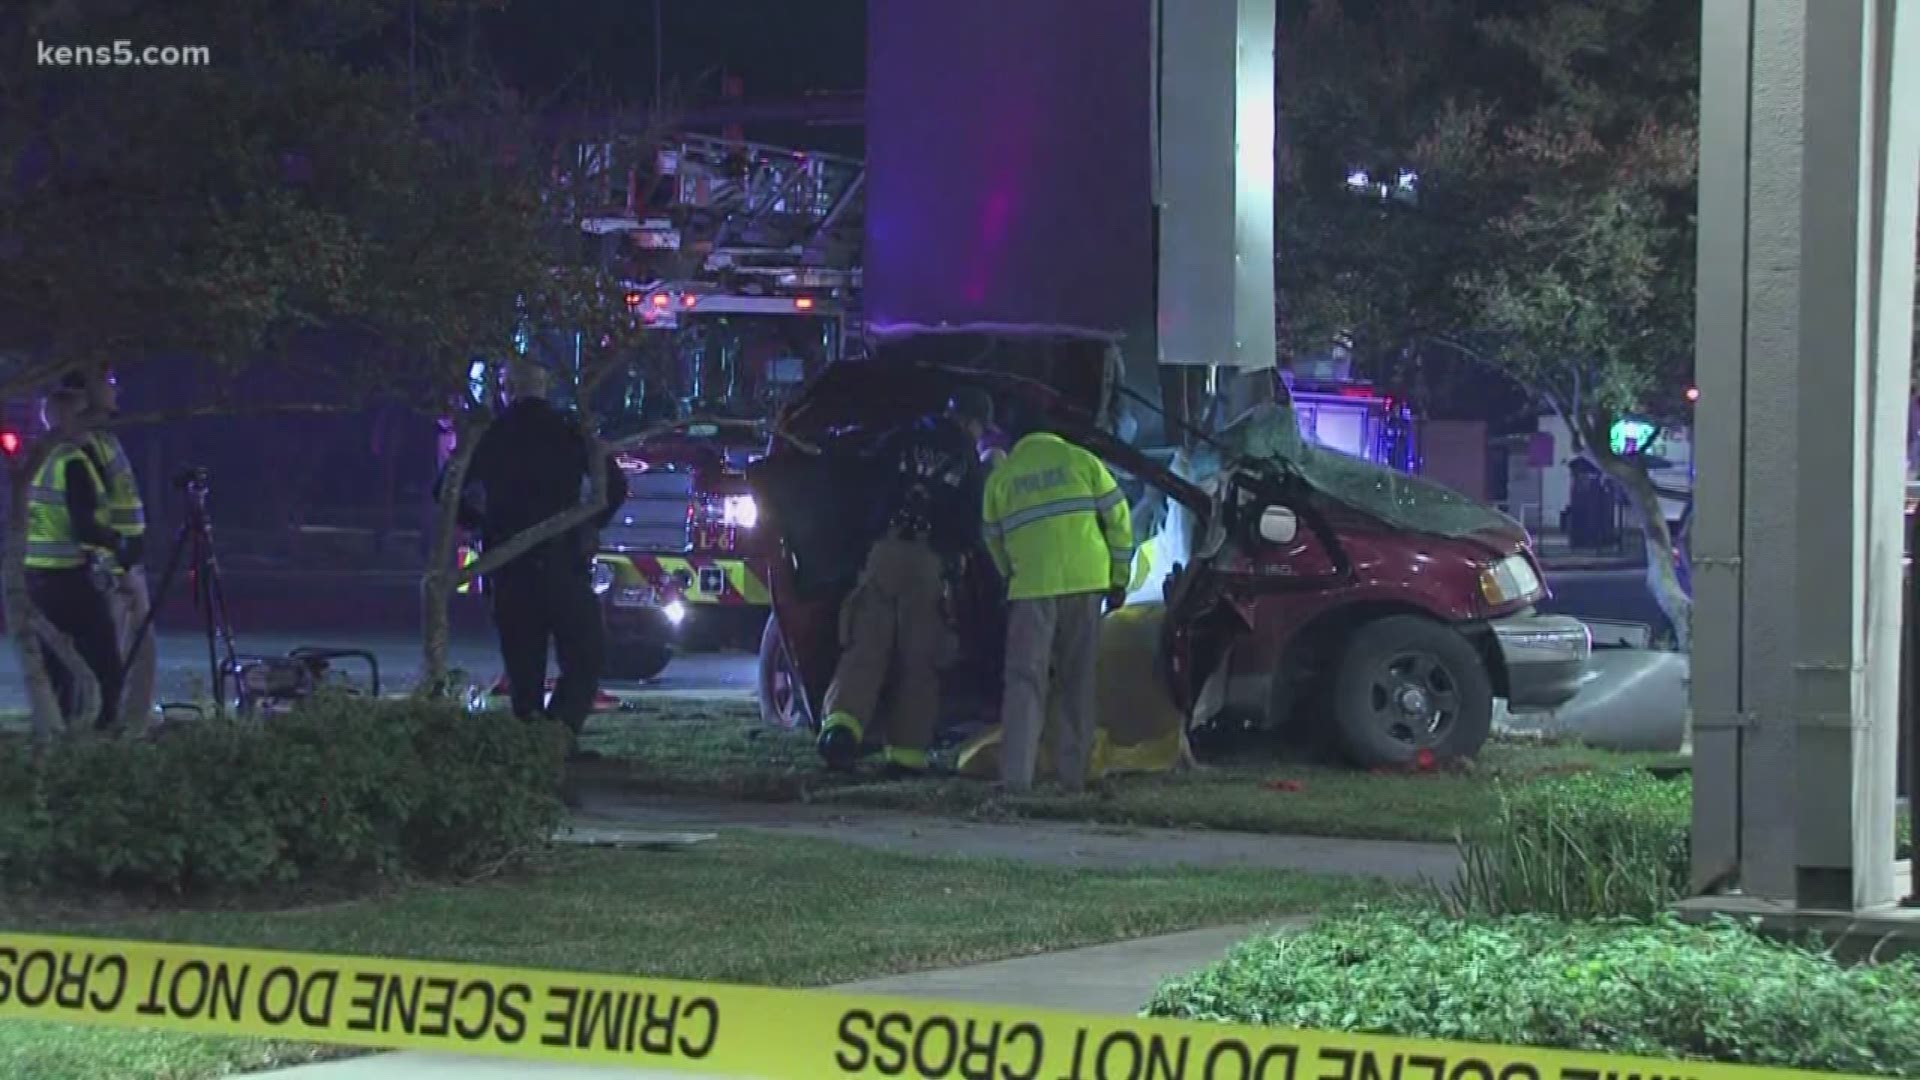 San Antonio Police are investigating if alcohol was a factor after a woman crashed her car into a sign.